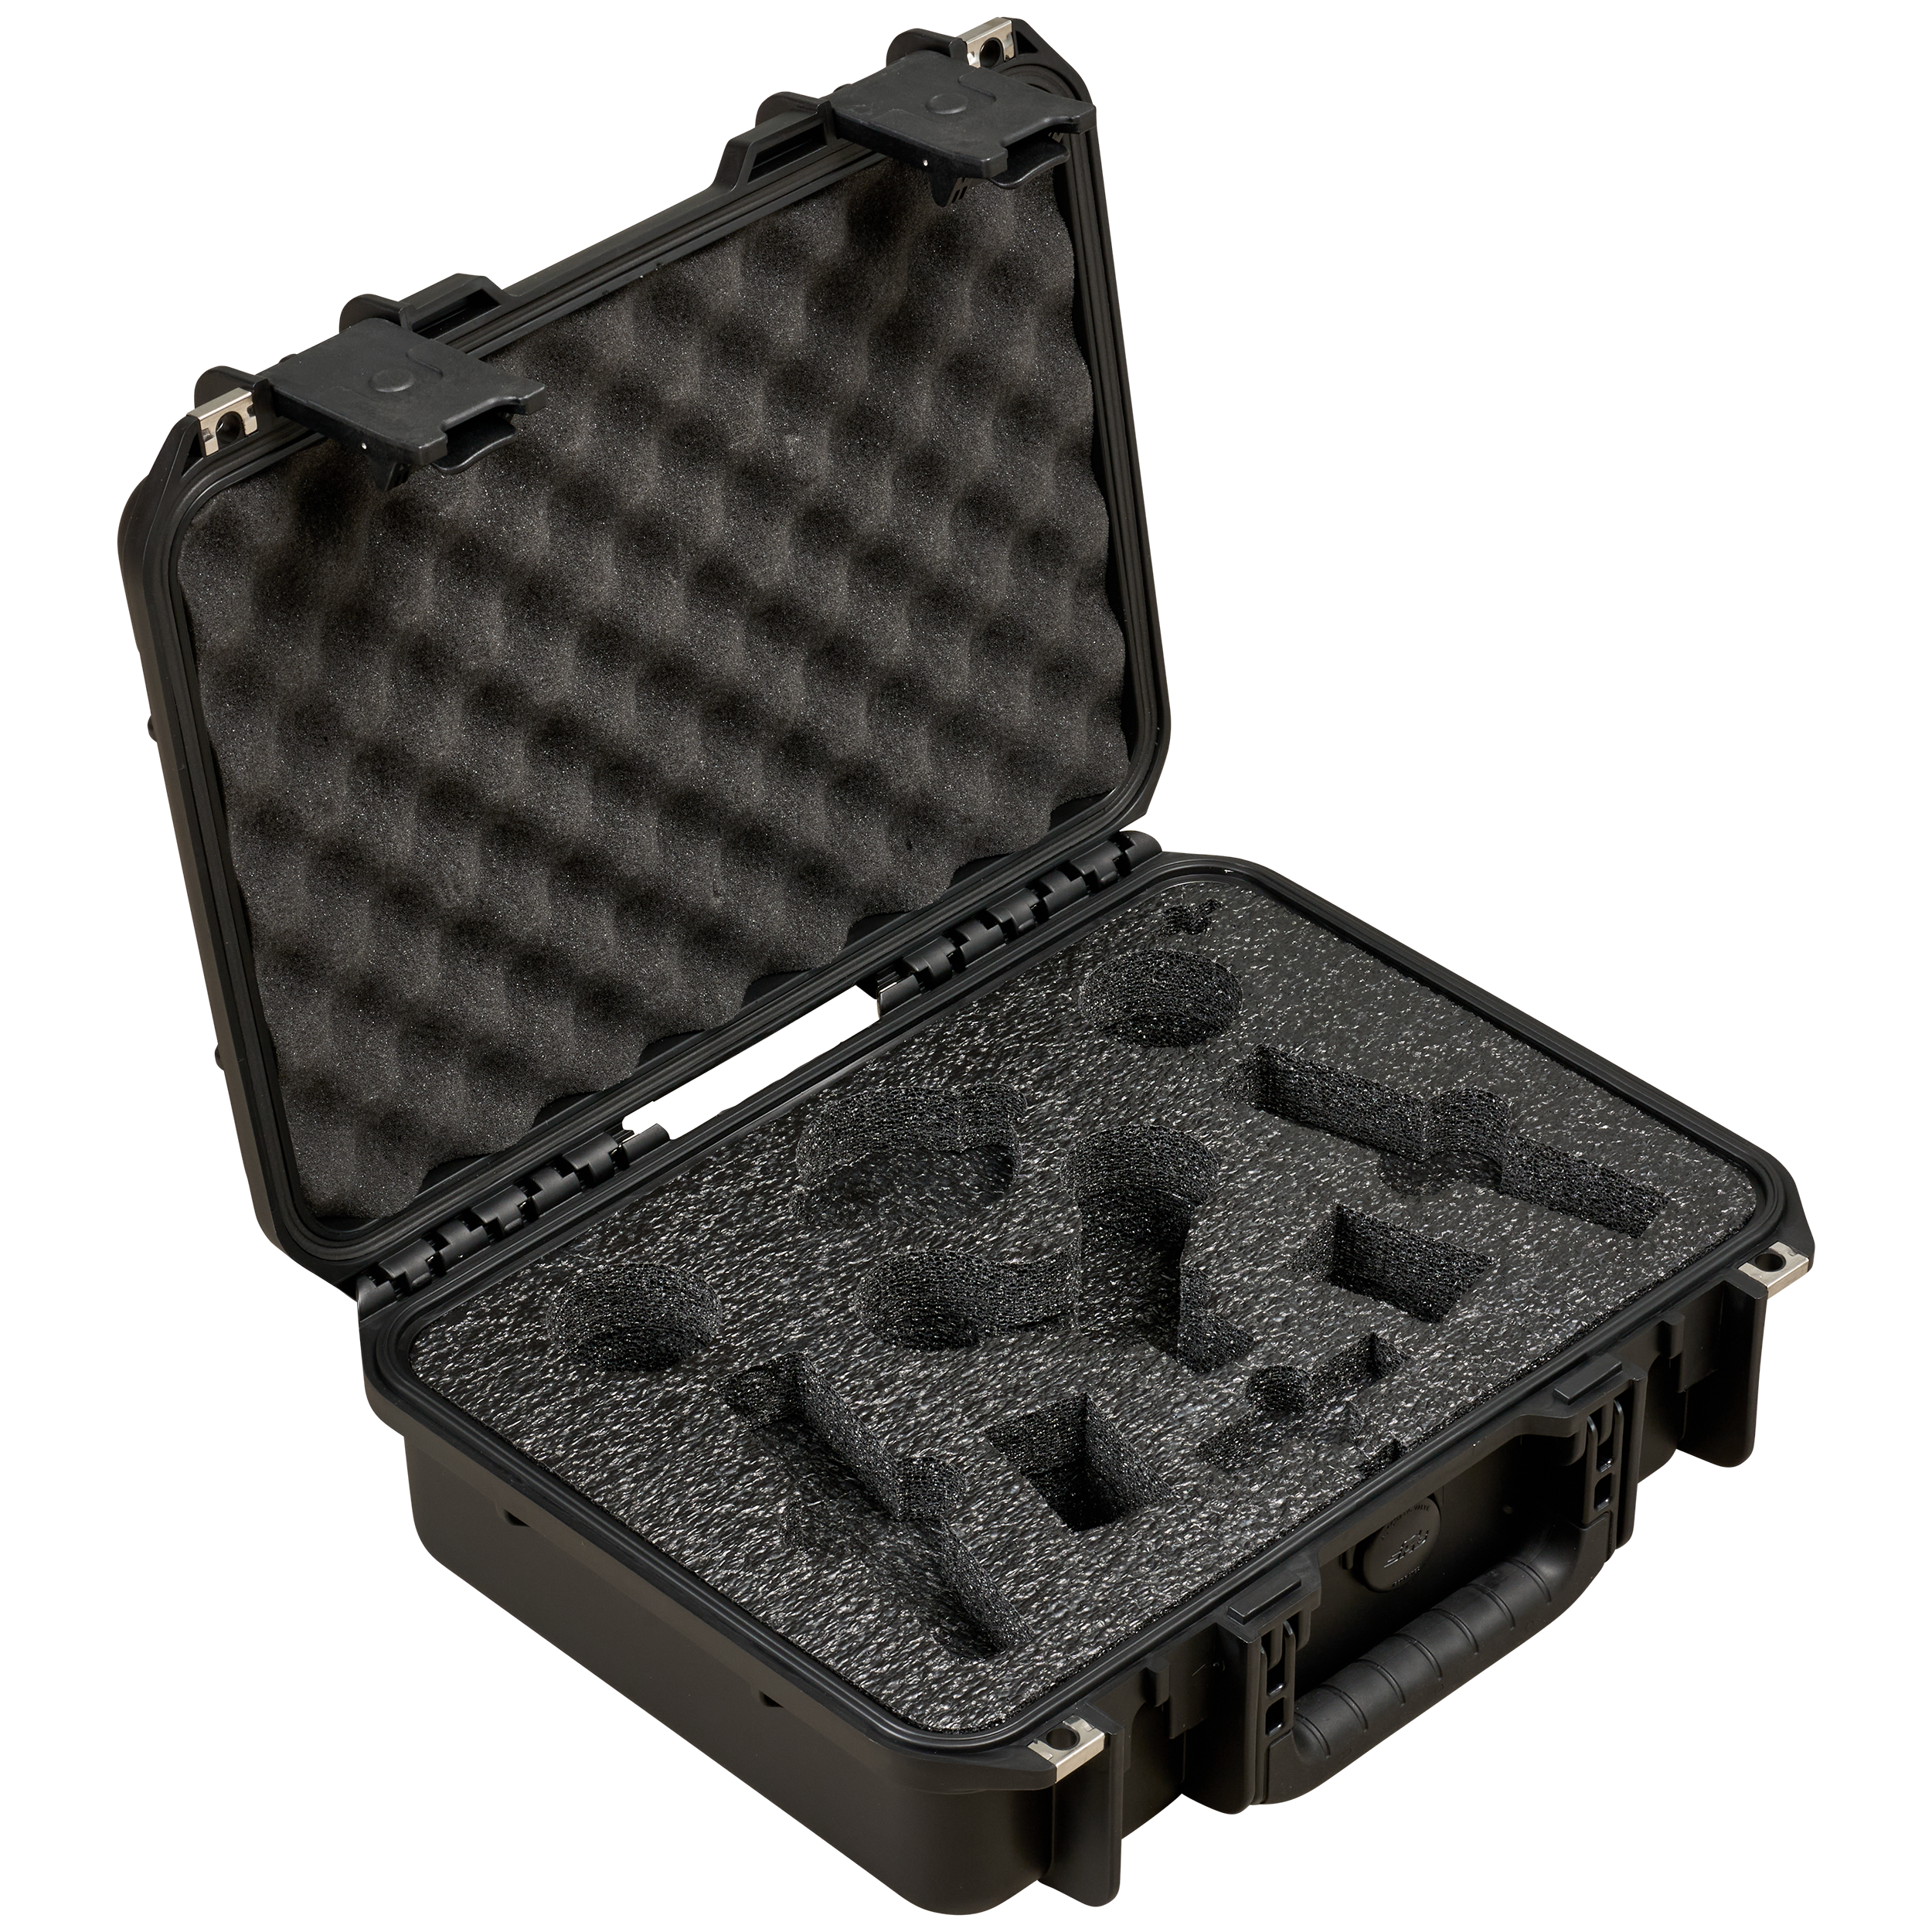 BYFP ipCase for Shure Presidential SM57 Dual Microphone Kit